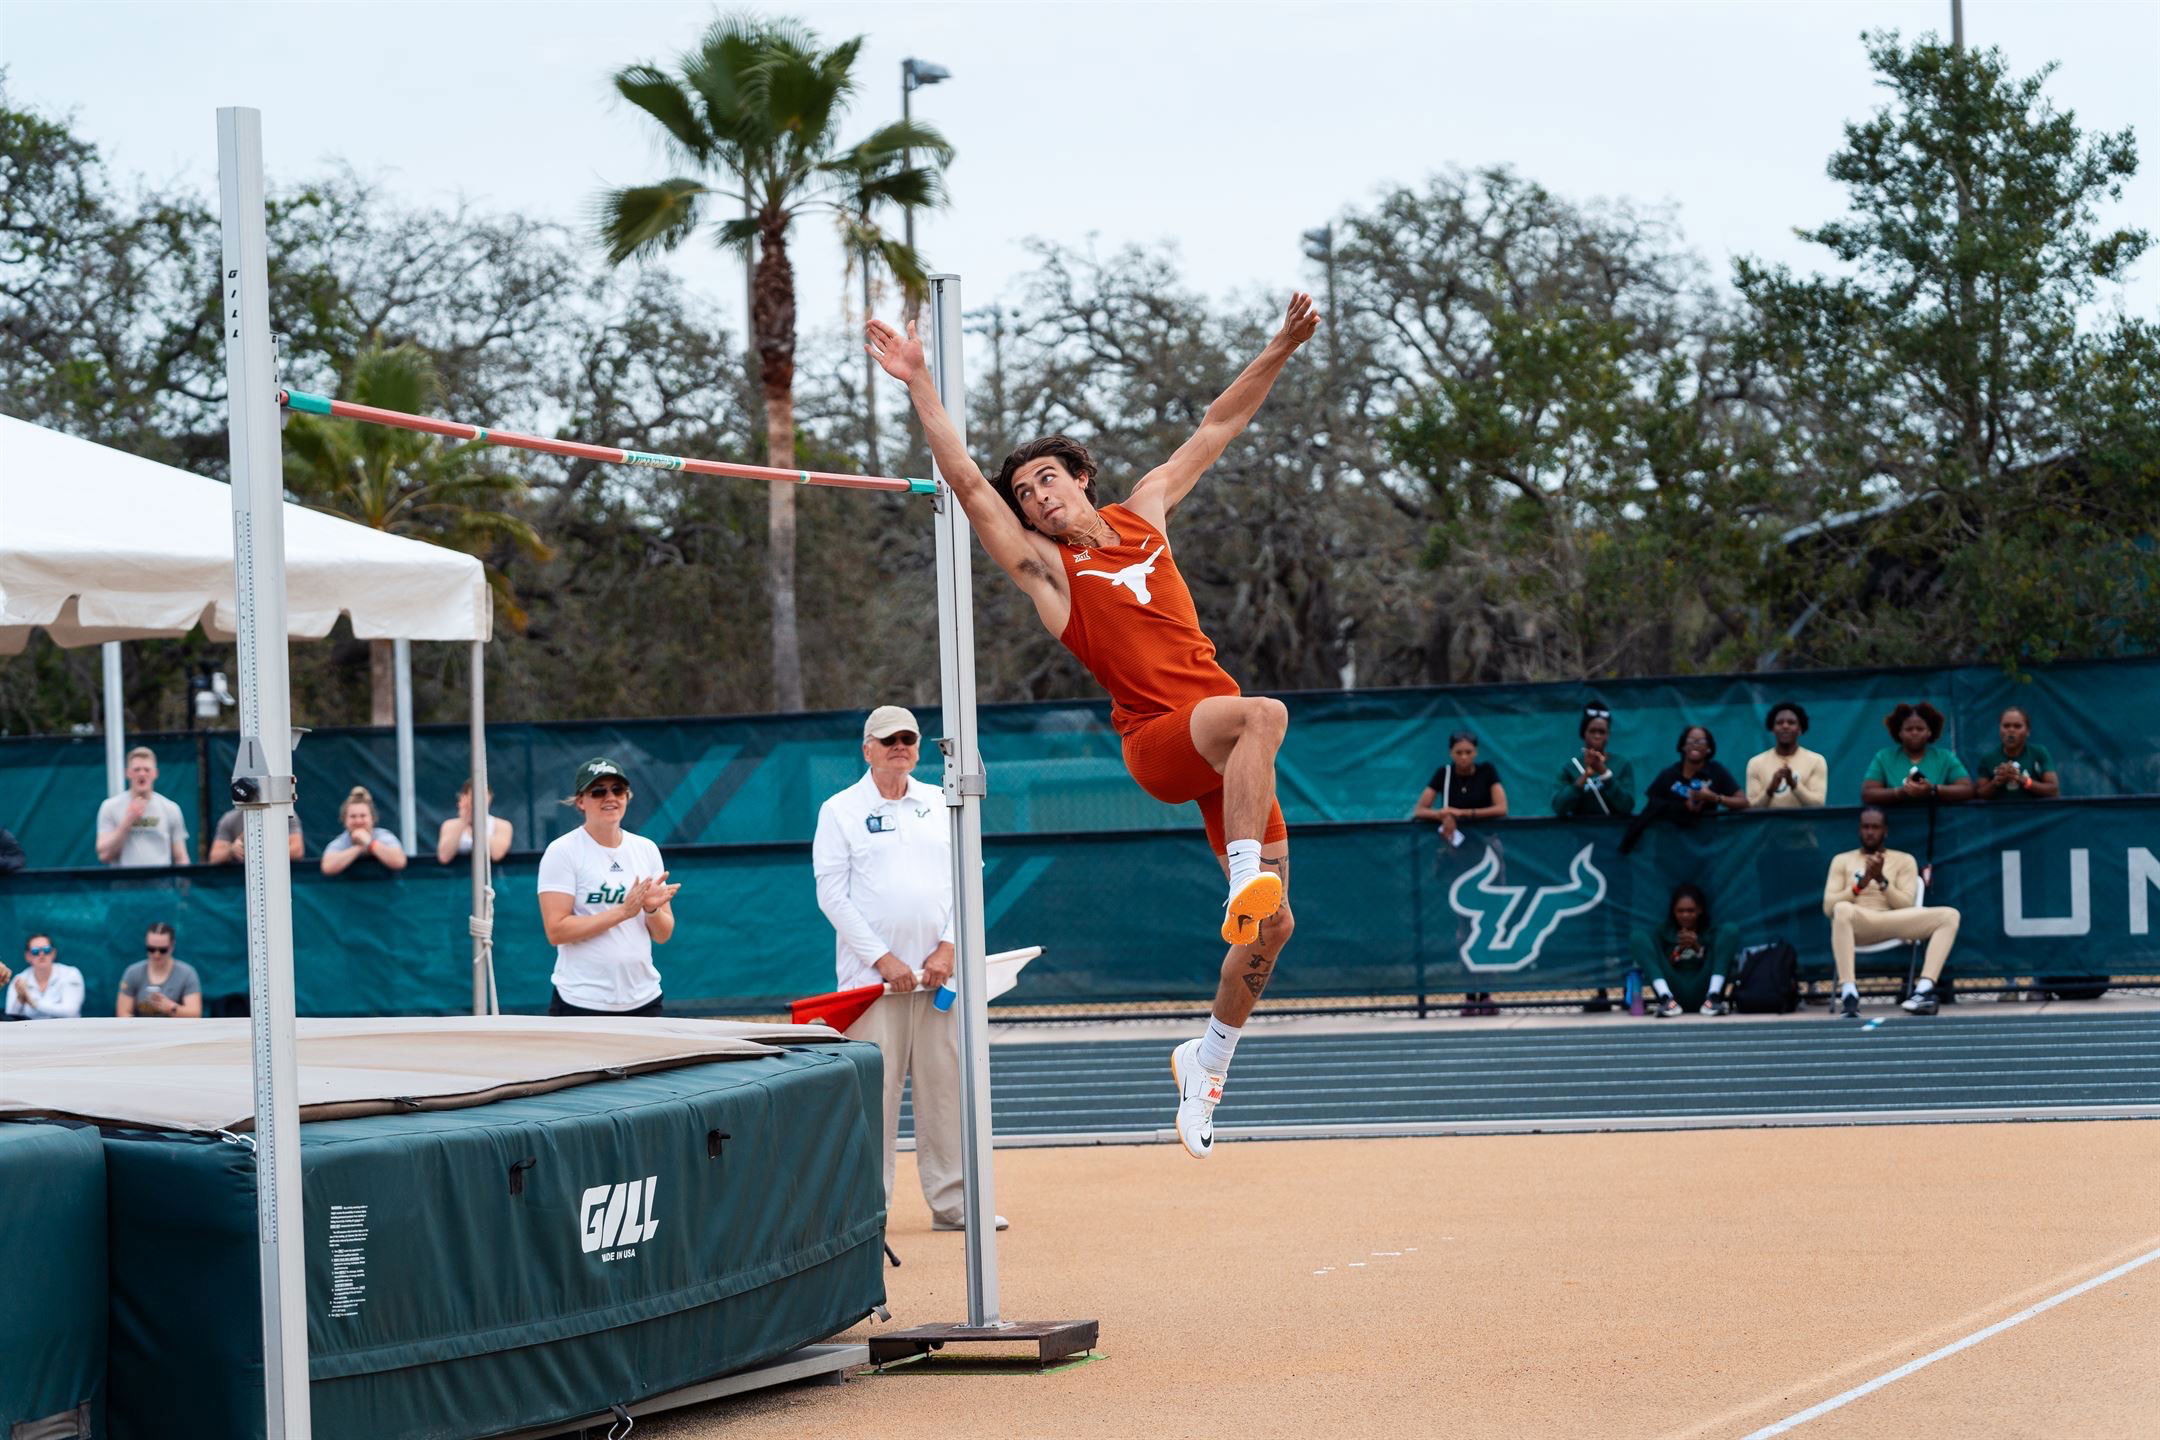 Hurley high jumping for the University of Texas (Courtesy Sam Hurley)